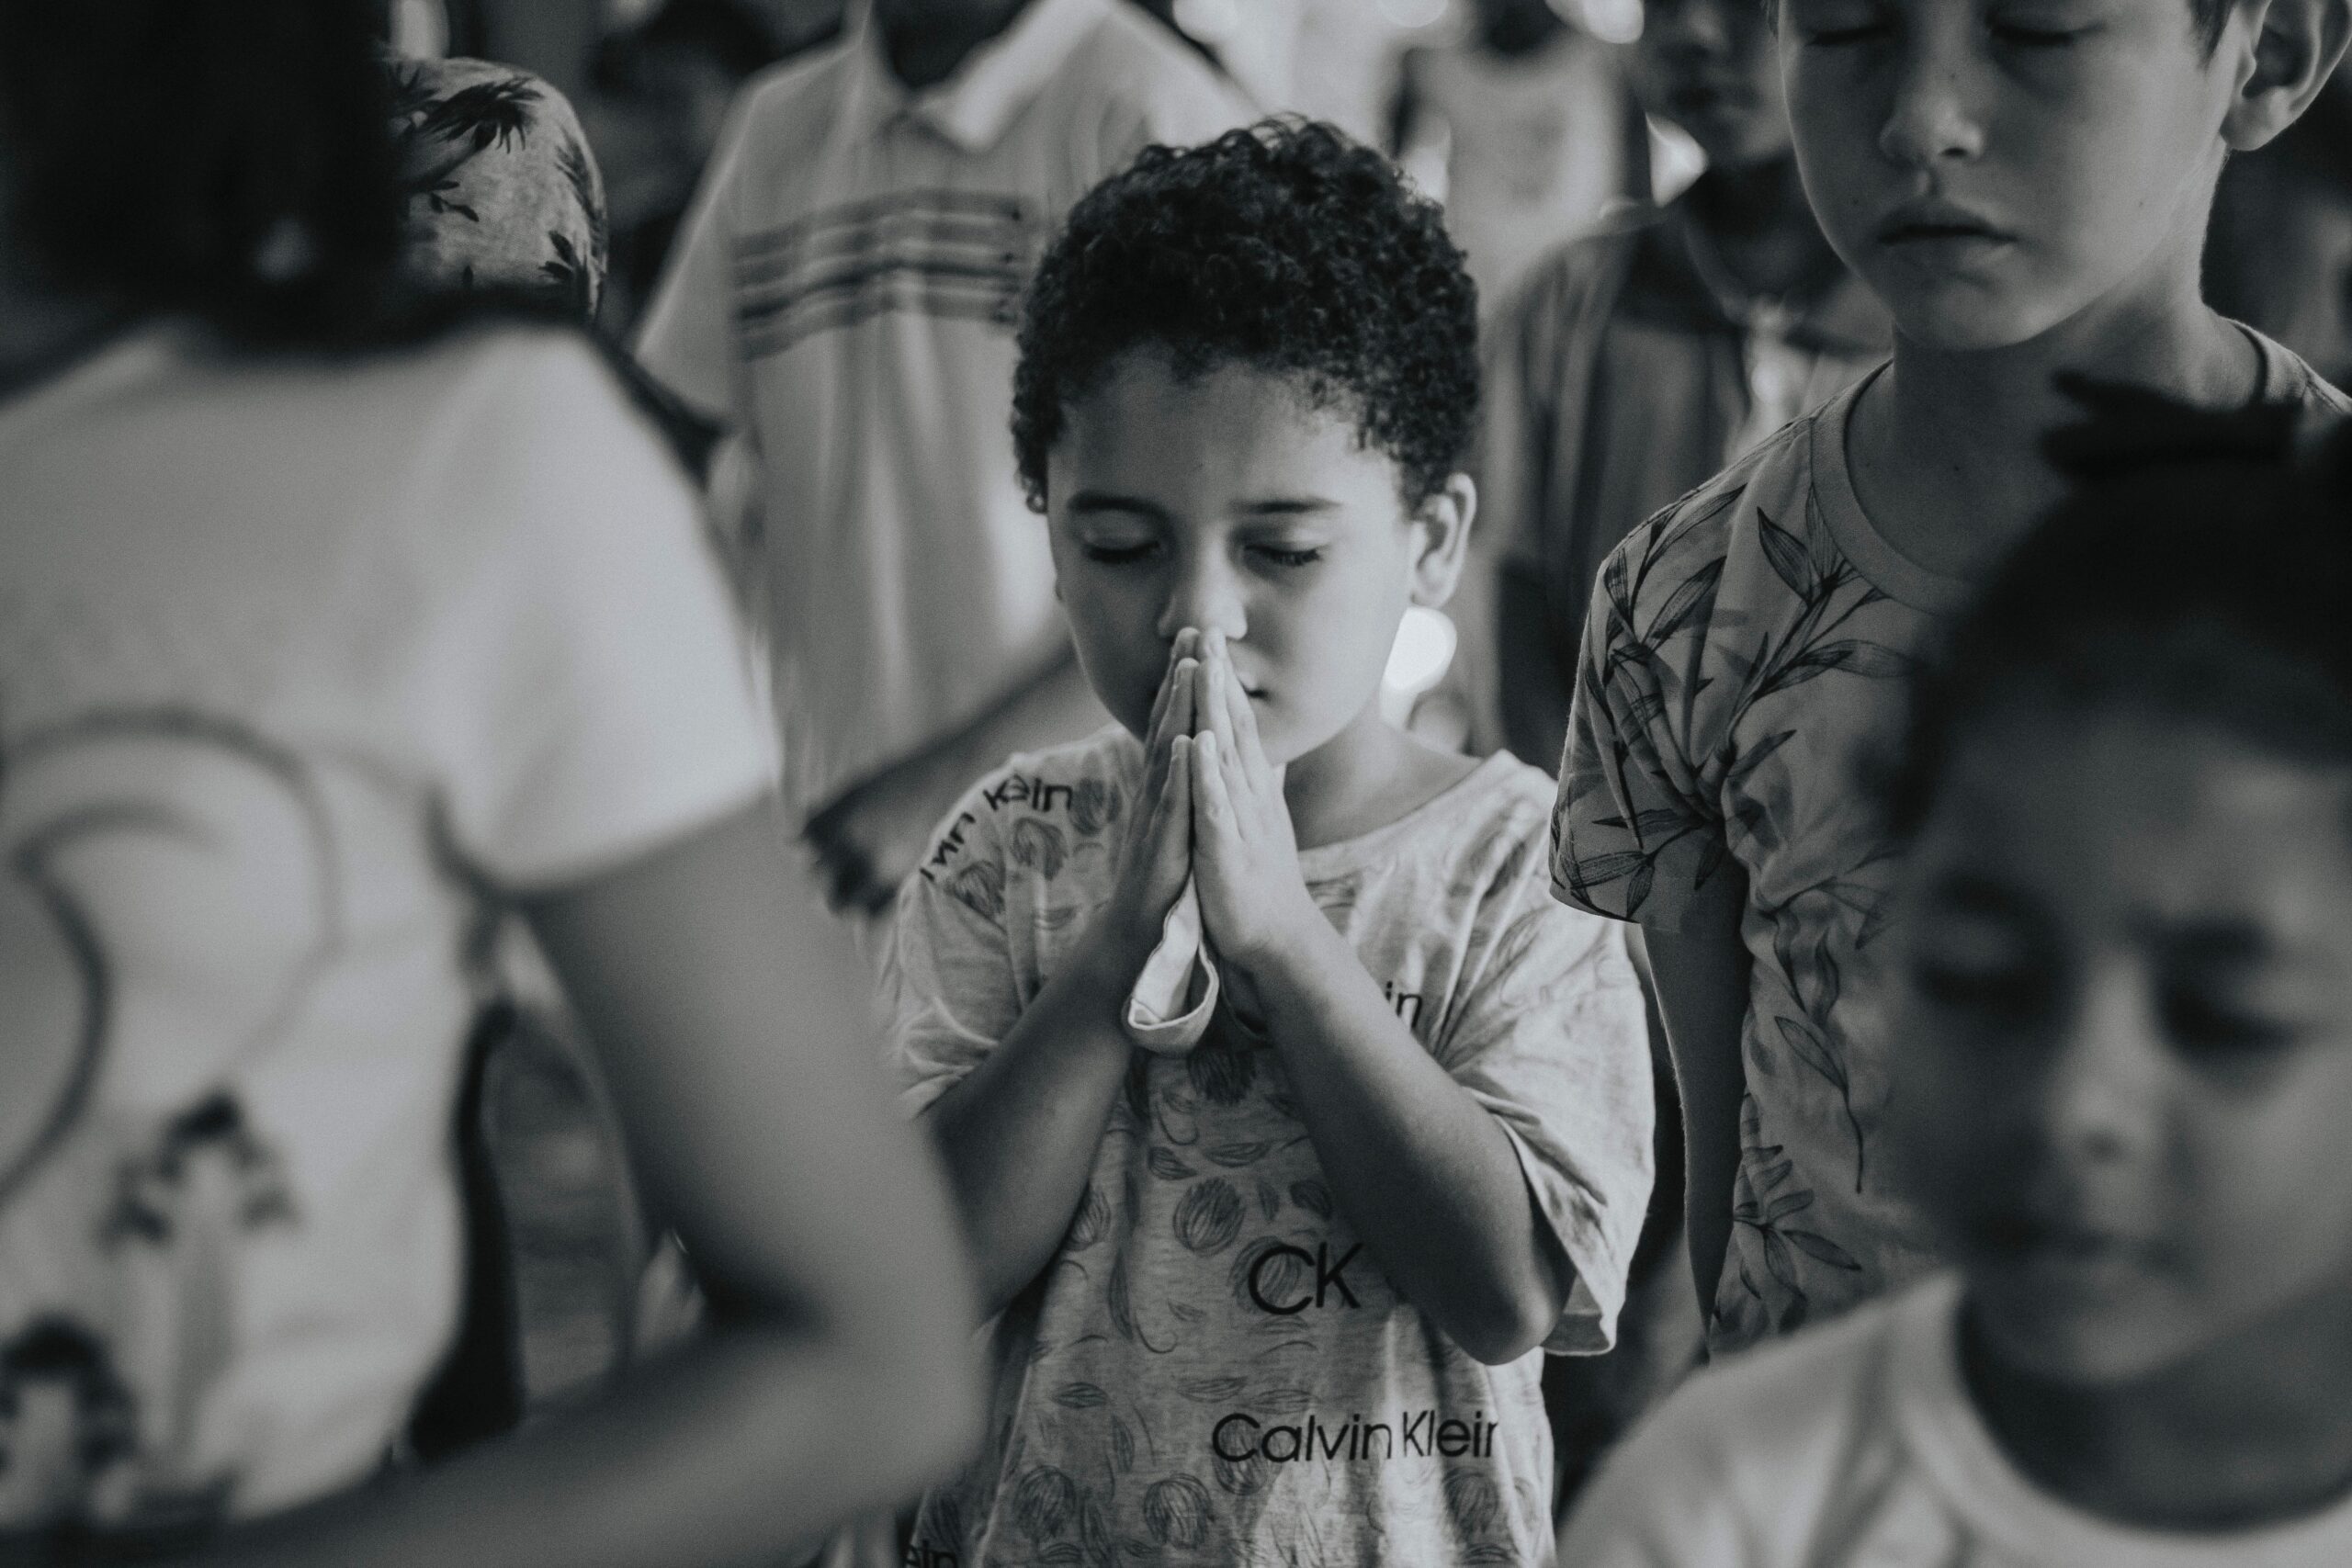 A young boy is praying in the middle of a crowd. Your faith can be tested when you are struggling through various trials. Christian counselors at Sojourner Counseling can help you strengthen your faith as you work through difficulties. Begin your Christian counseling in Raleigh NC today.